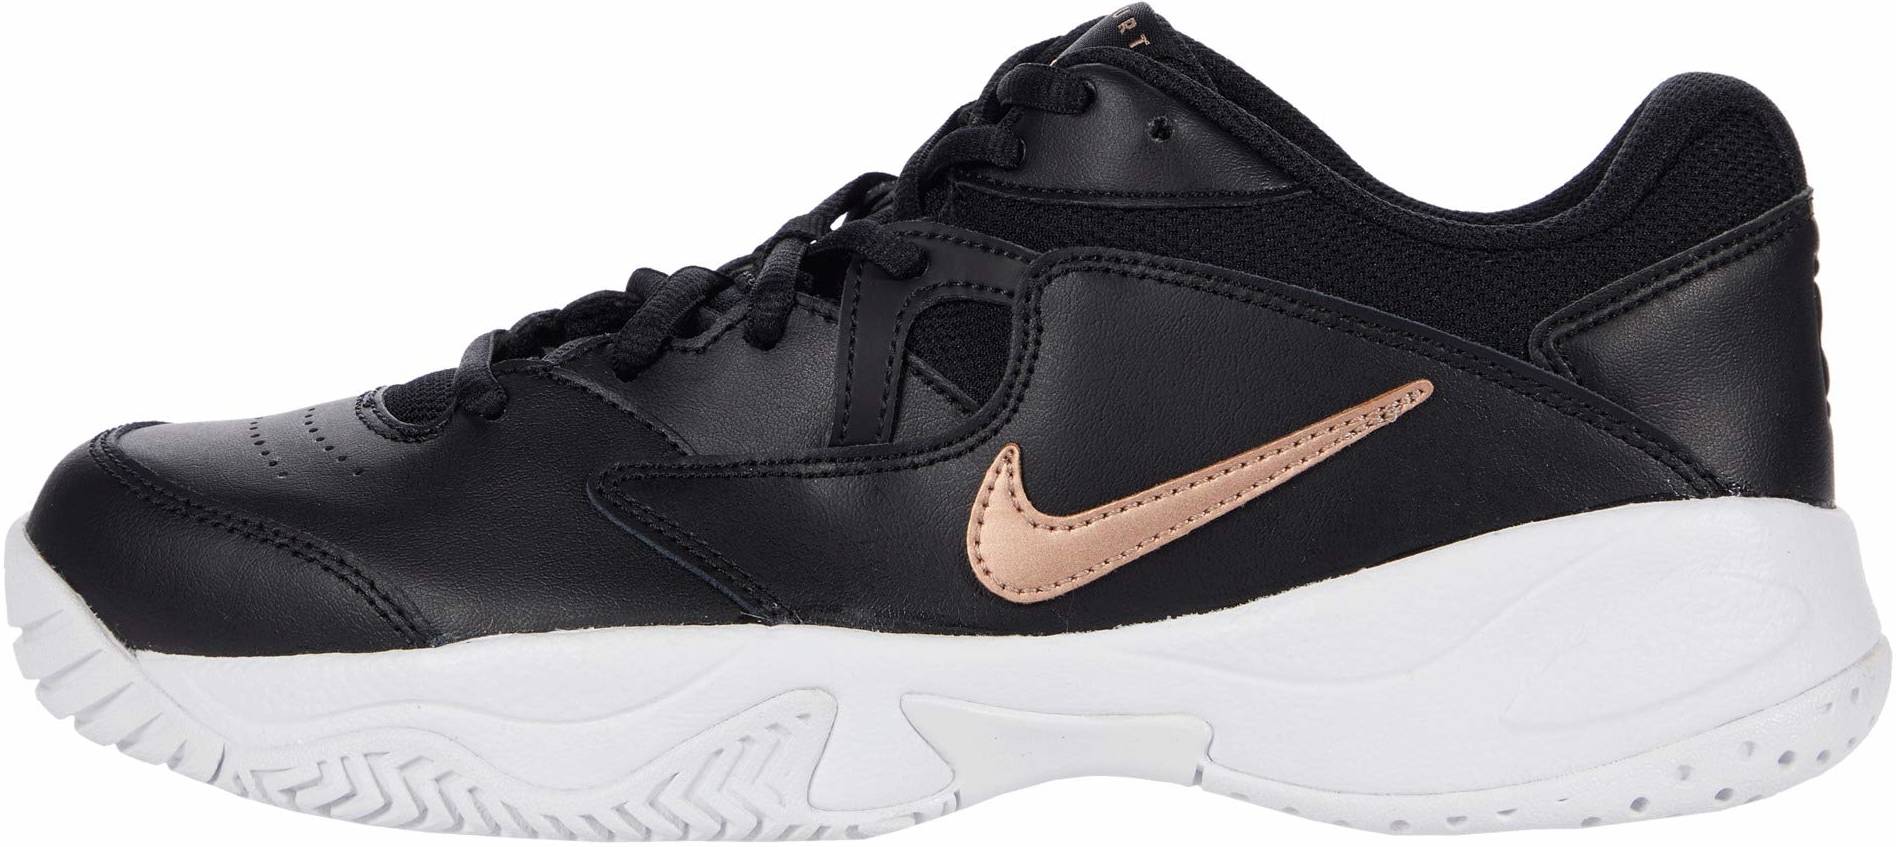 nike court lite 2 review